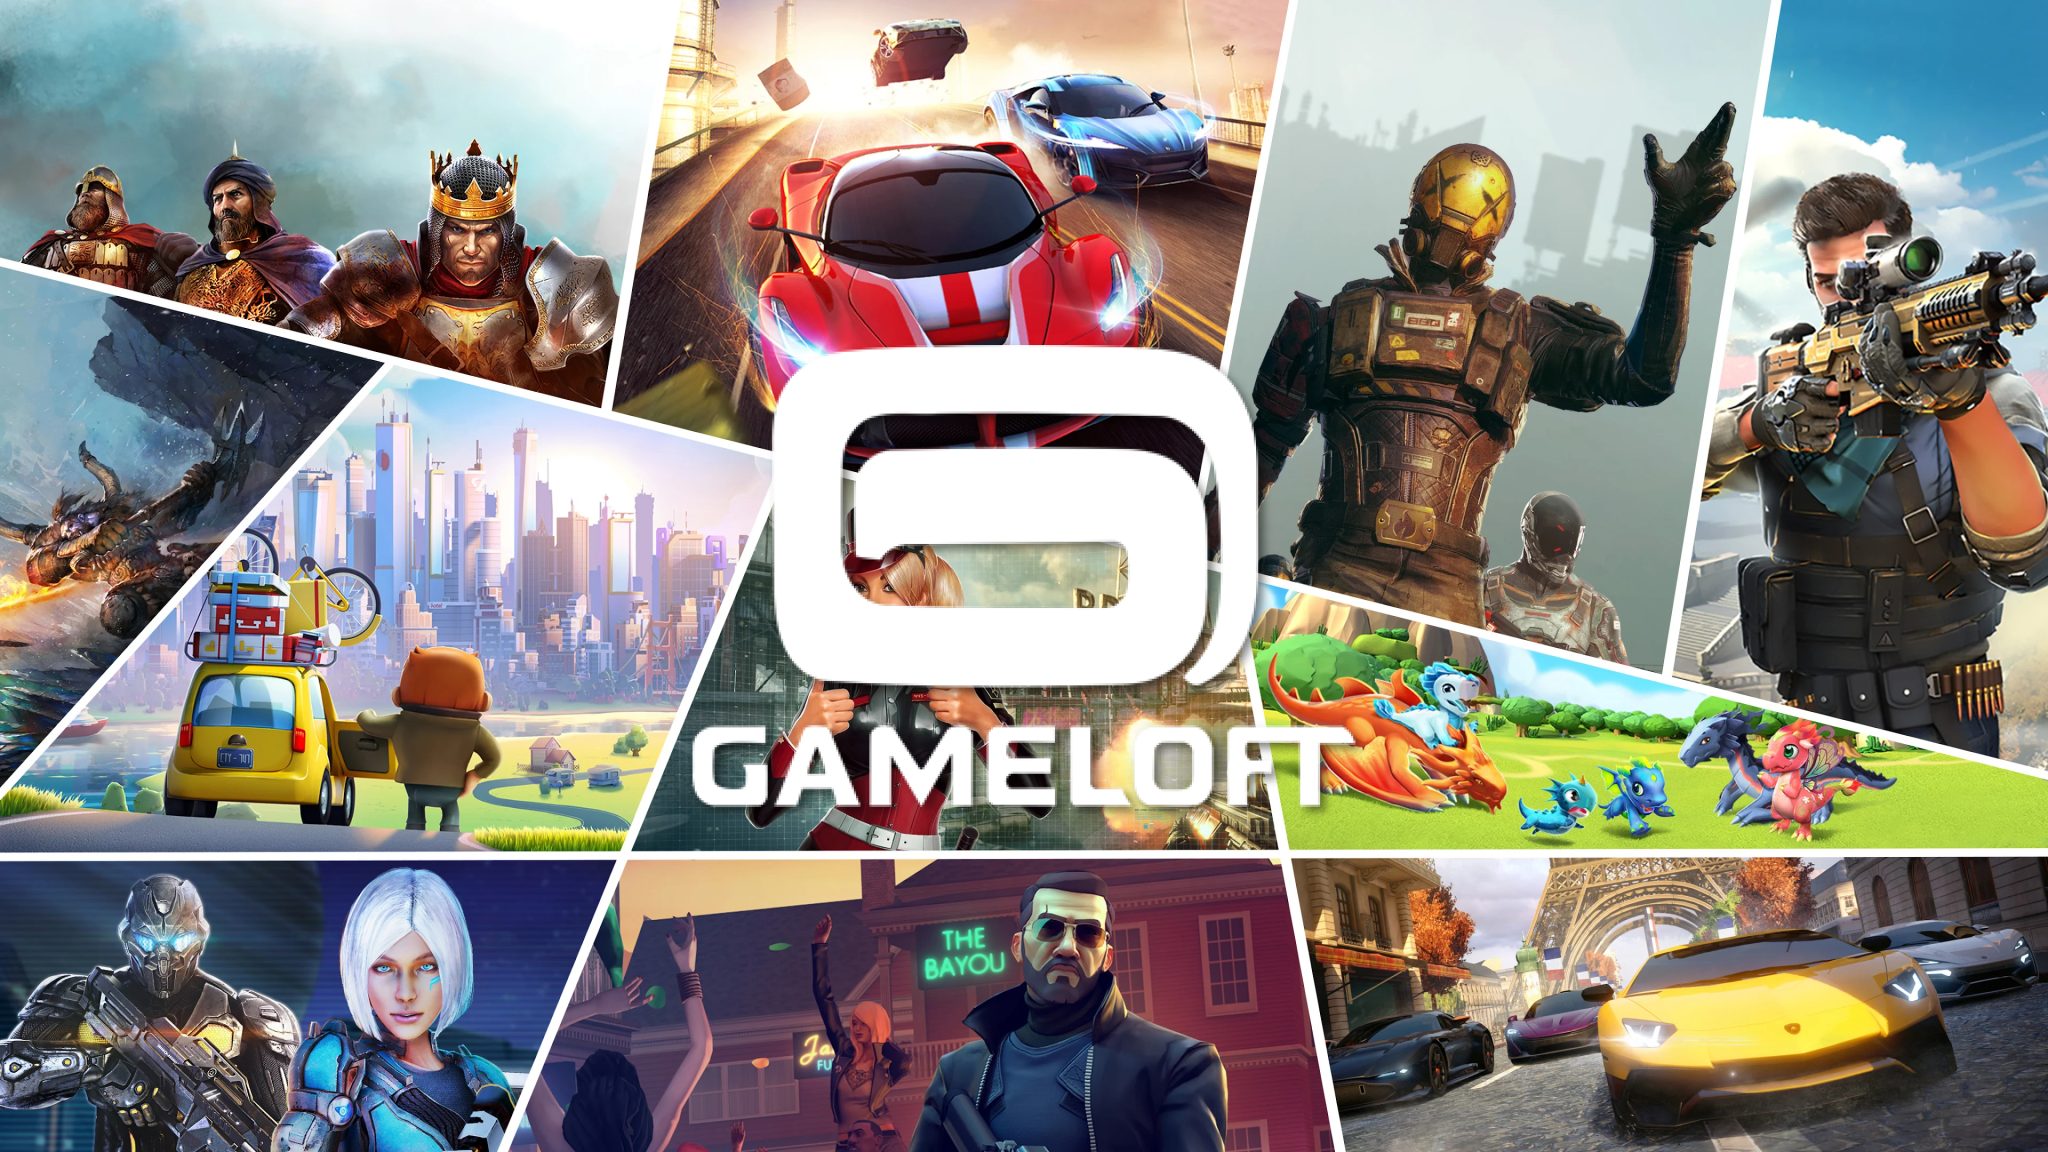 Disney Dreamlight Valley reaffirms Gameloft's path to consoles and PC